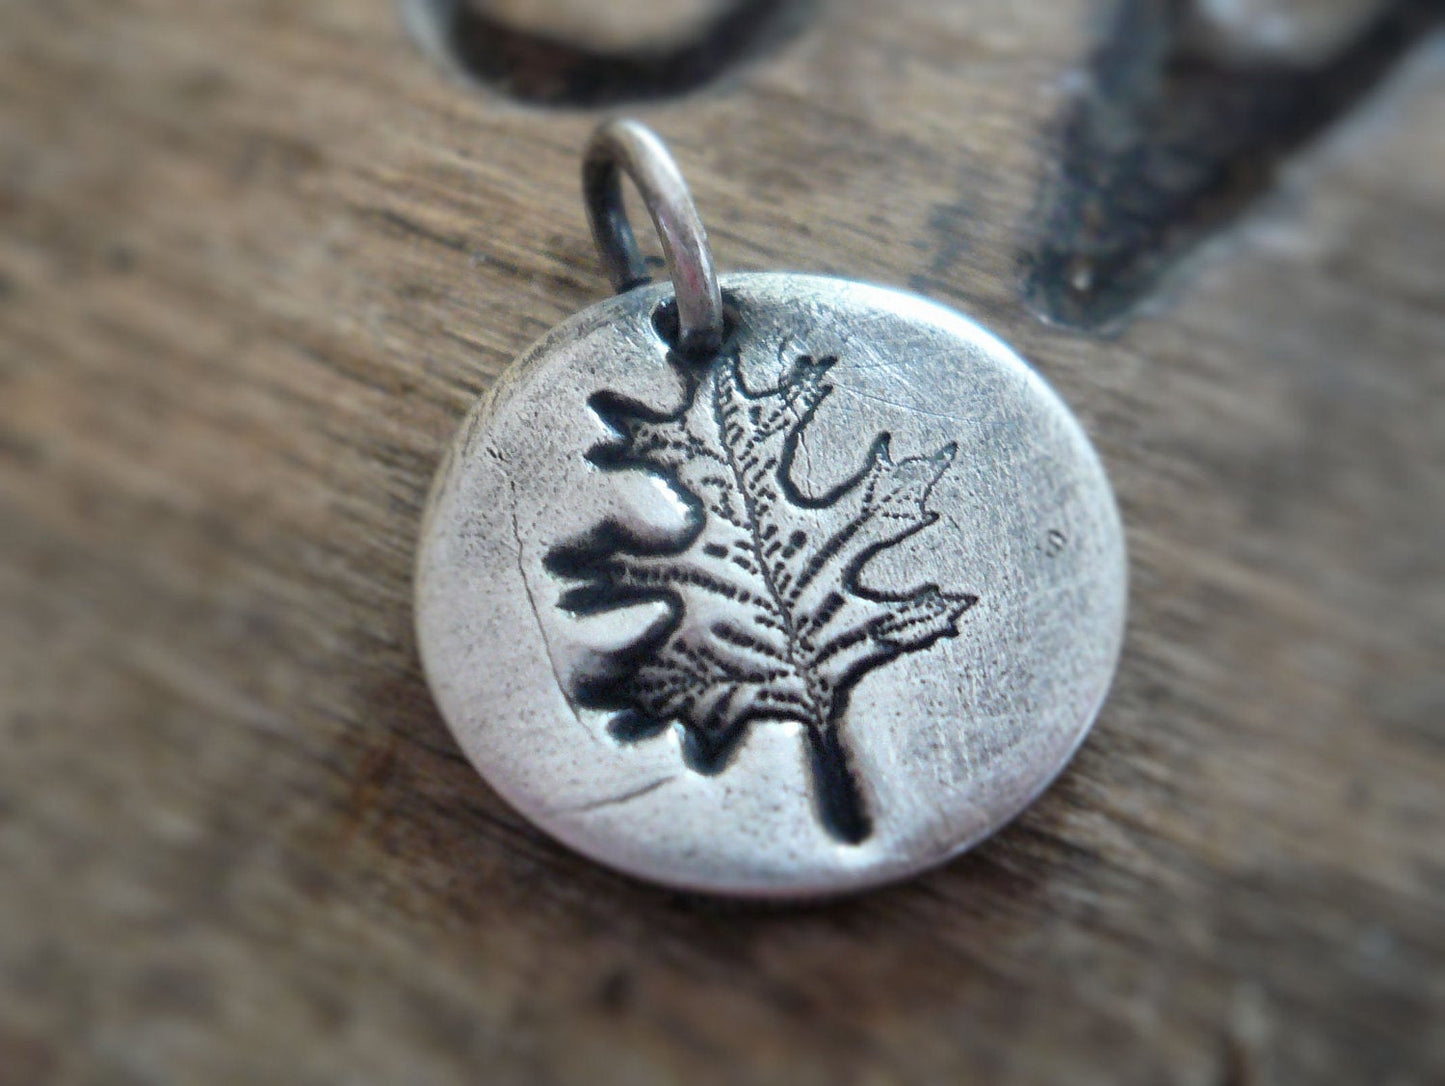 Mighty Oak Pendant- Handmade. Oxidized Fine Silver. Design Your Own Series